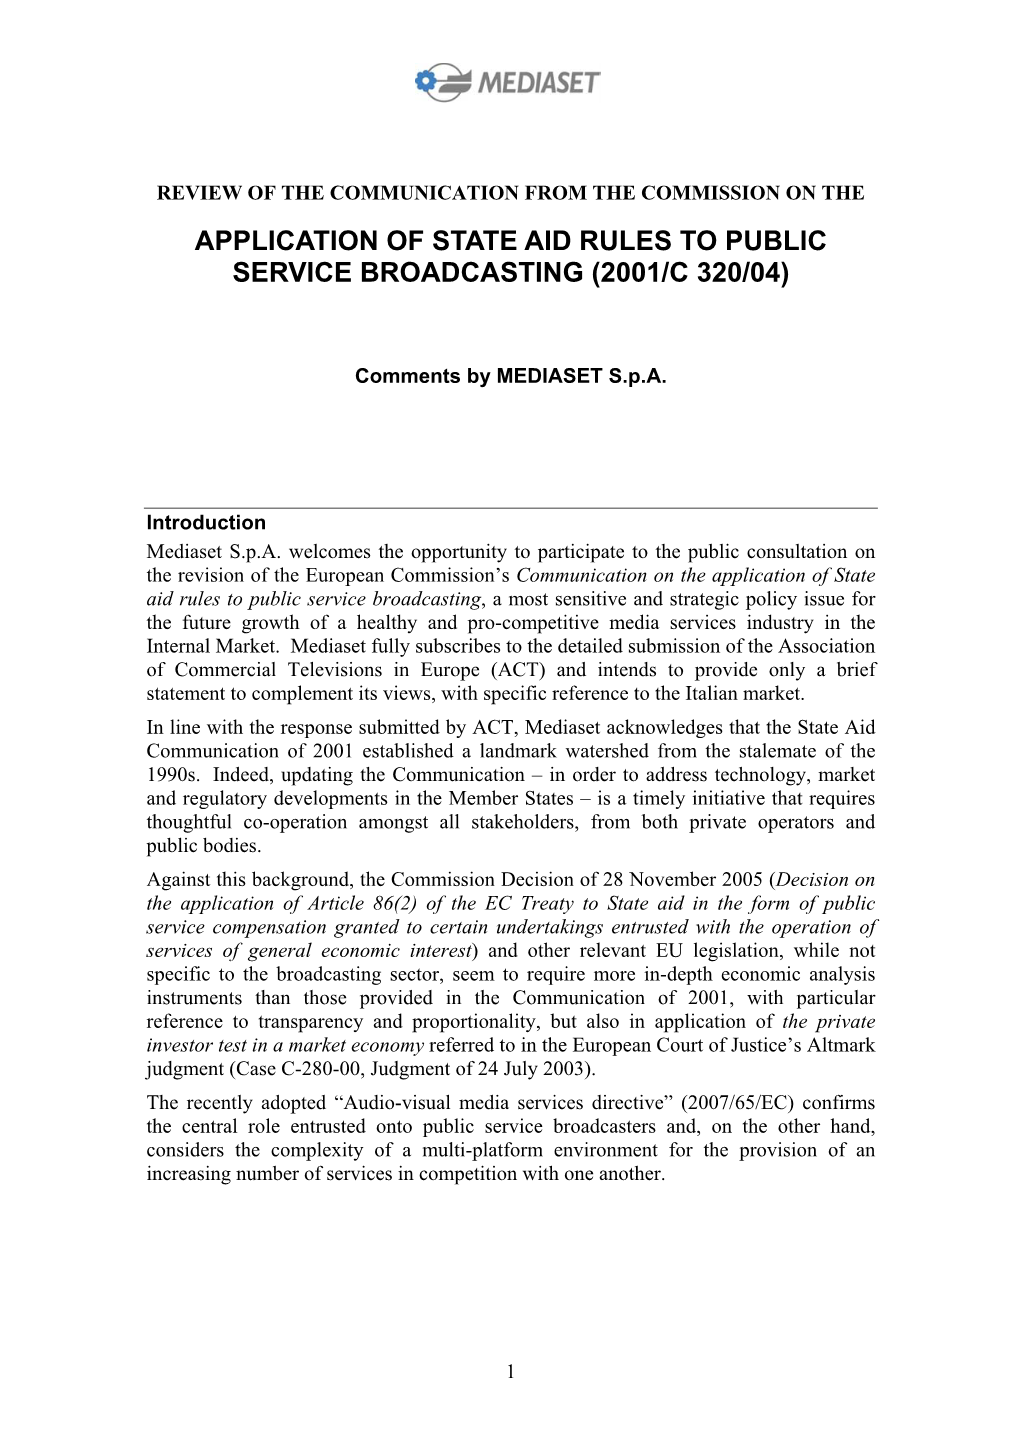 Application of State Aid Rules to Public Service Broadcasting (2001/C 320/04)